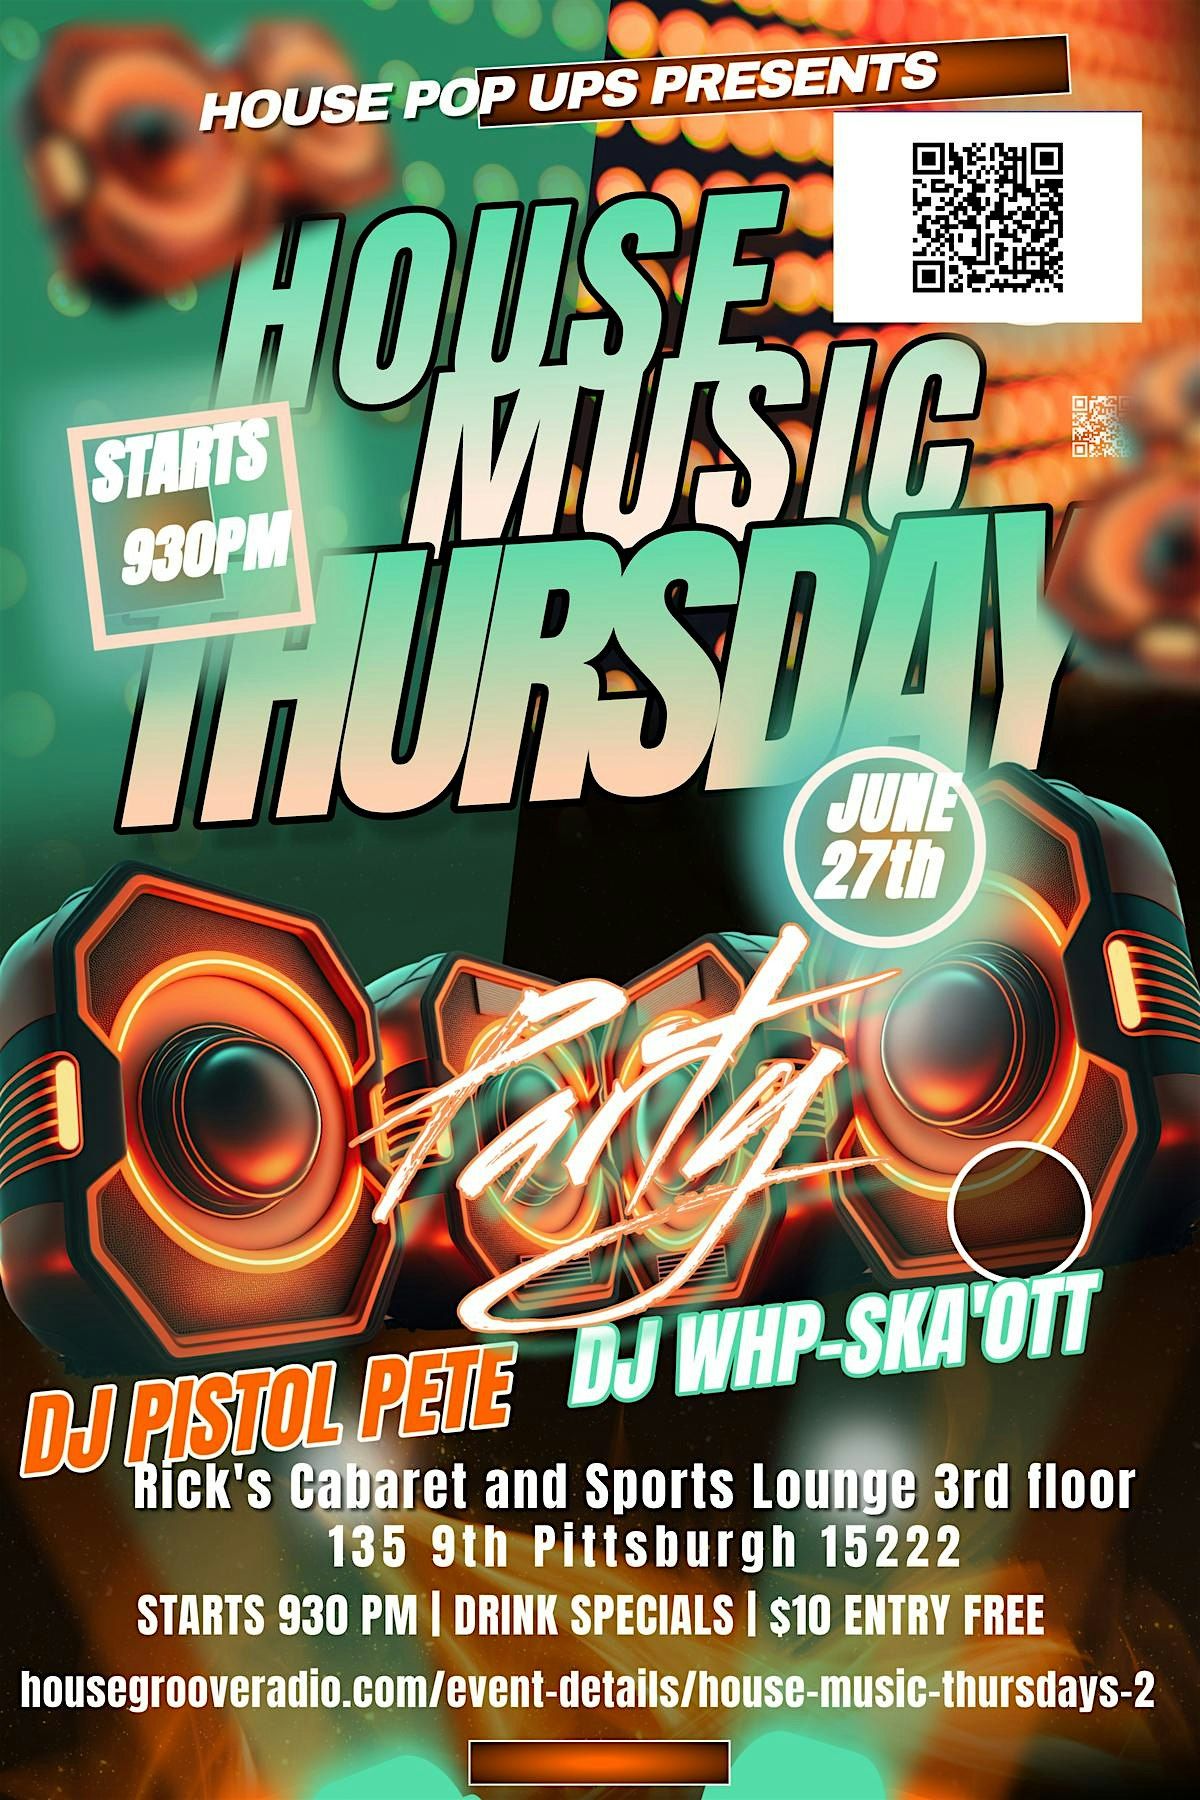 House Pop Ups House Music Thursday House Music Party Dancing Drink Specials EDM techno Soulful house